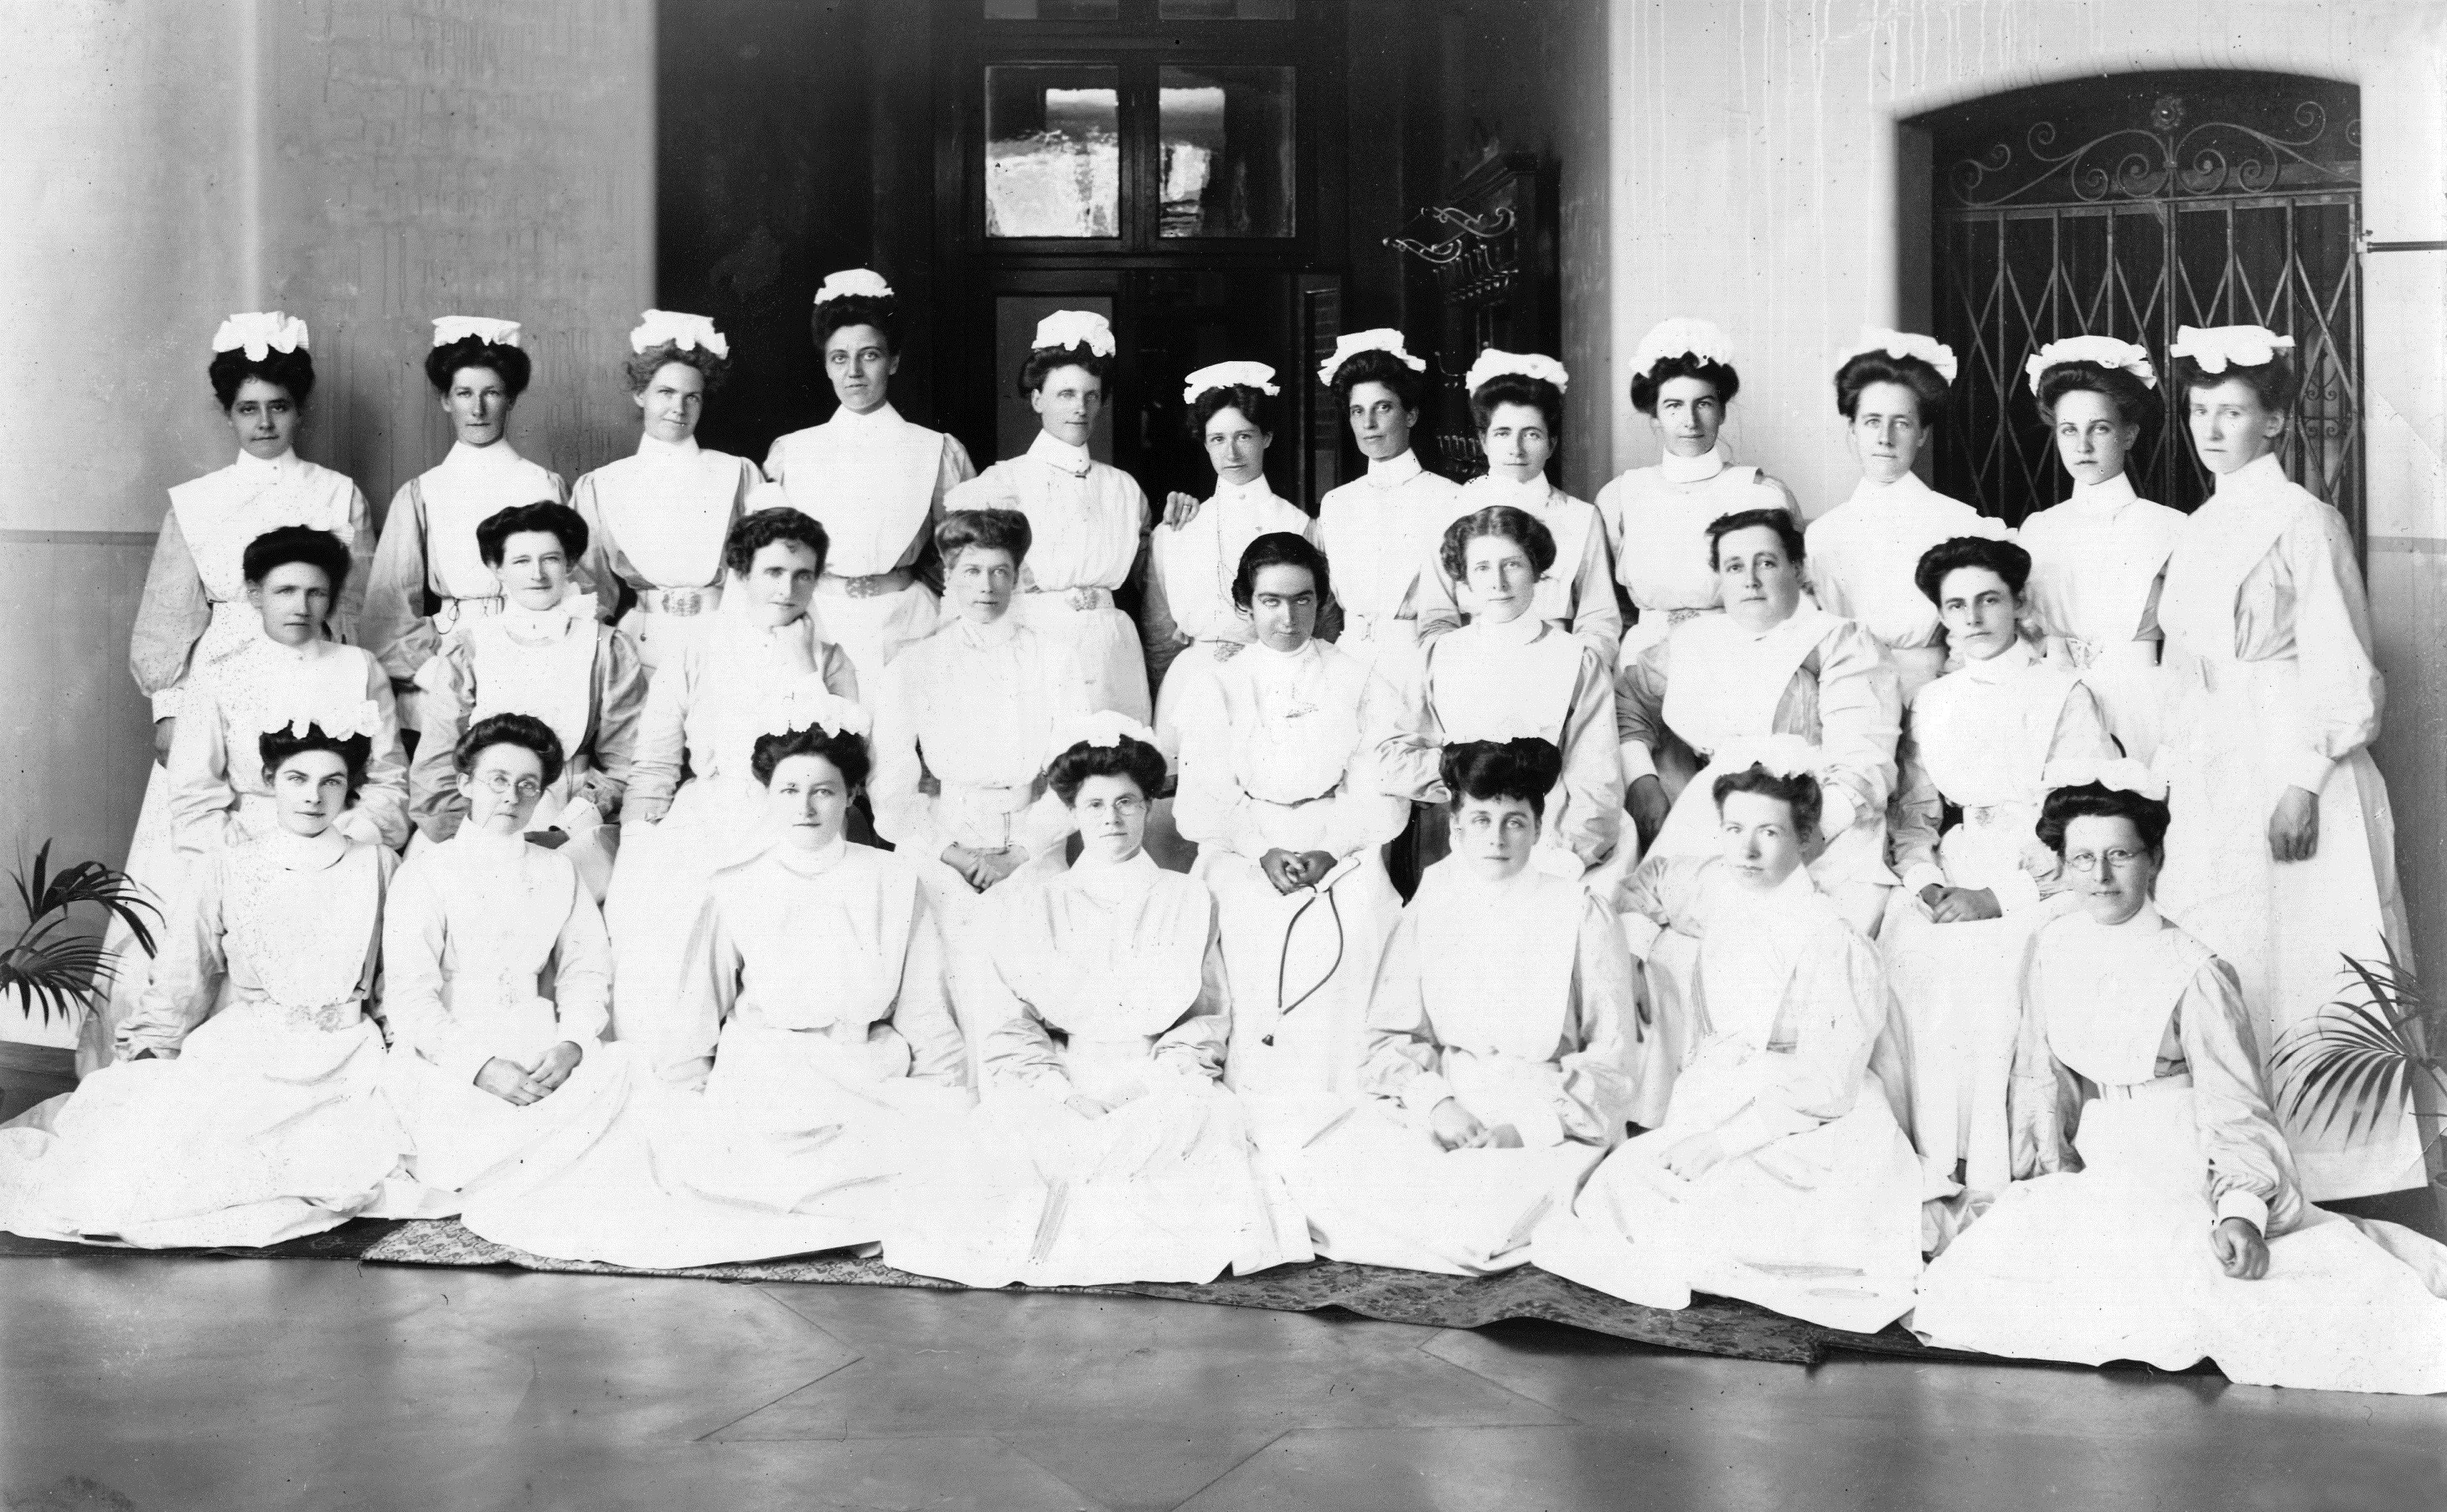 About periods  The Royal Women's Hospital